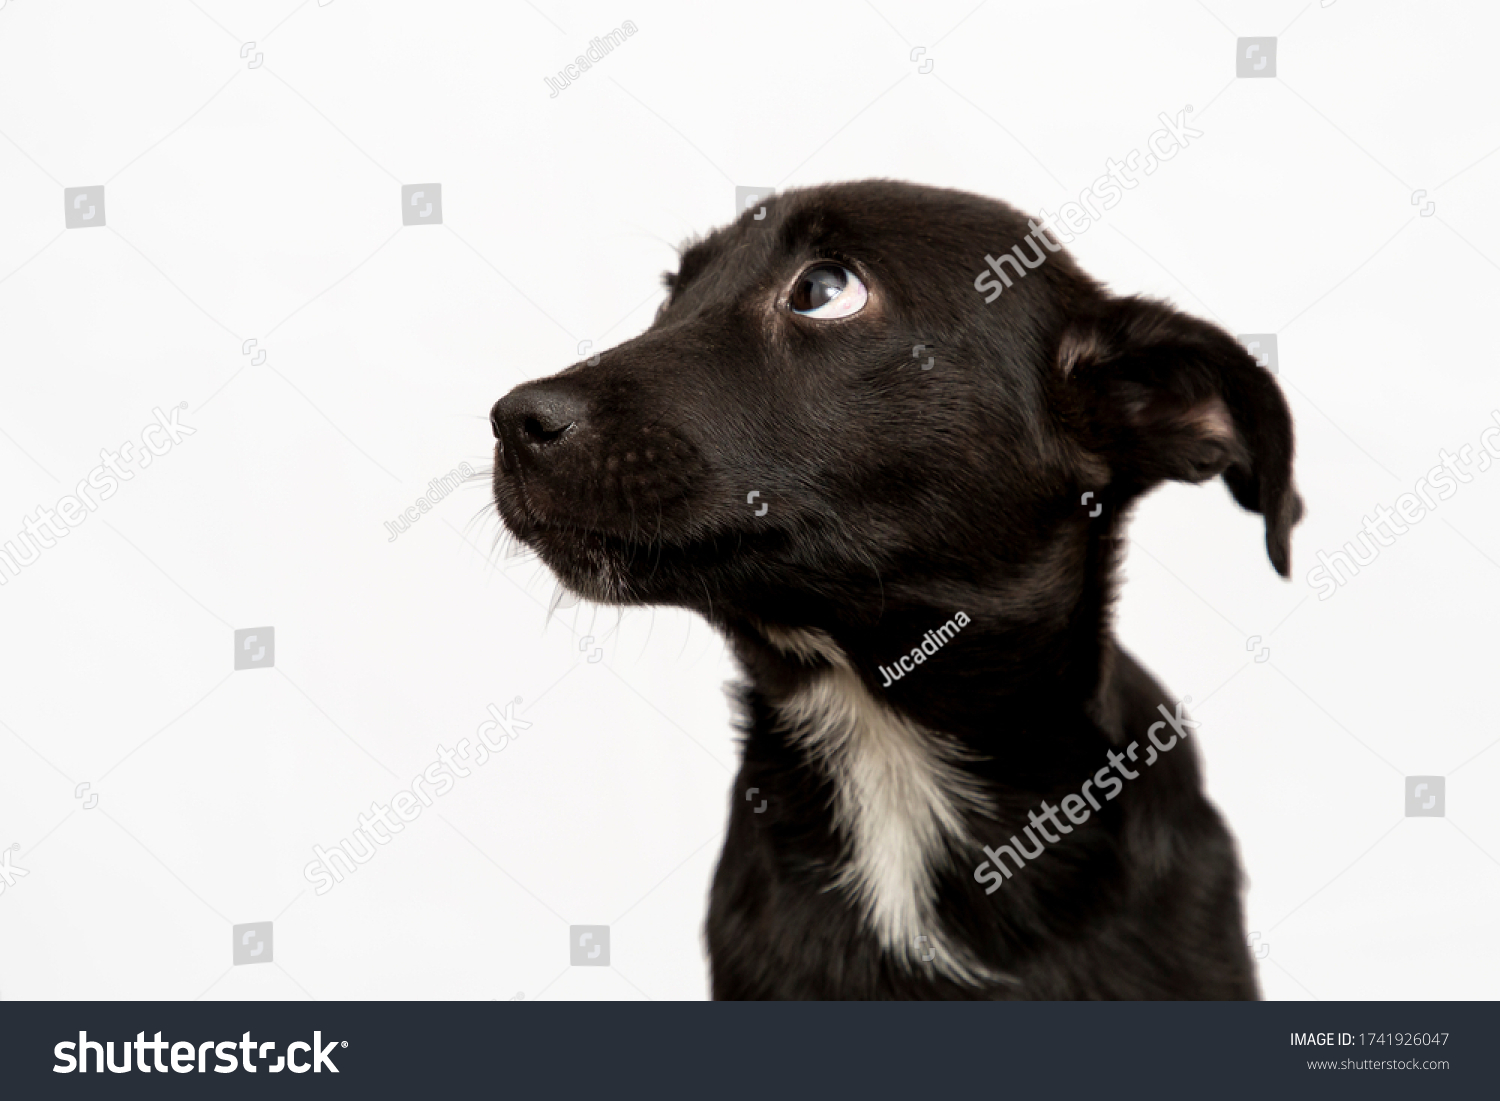 cute black puppy isolated on white. baby mutt dog looking sad #1741926047